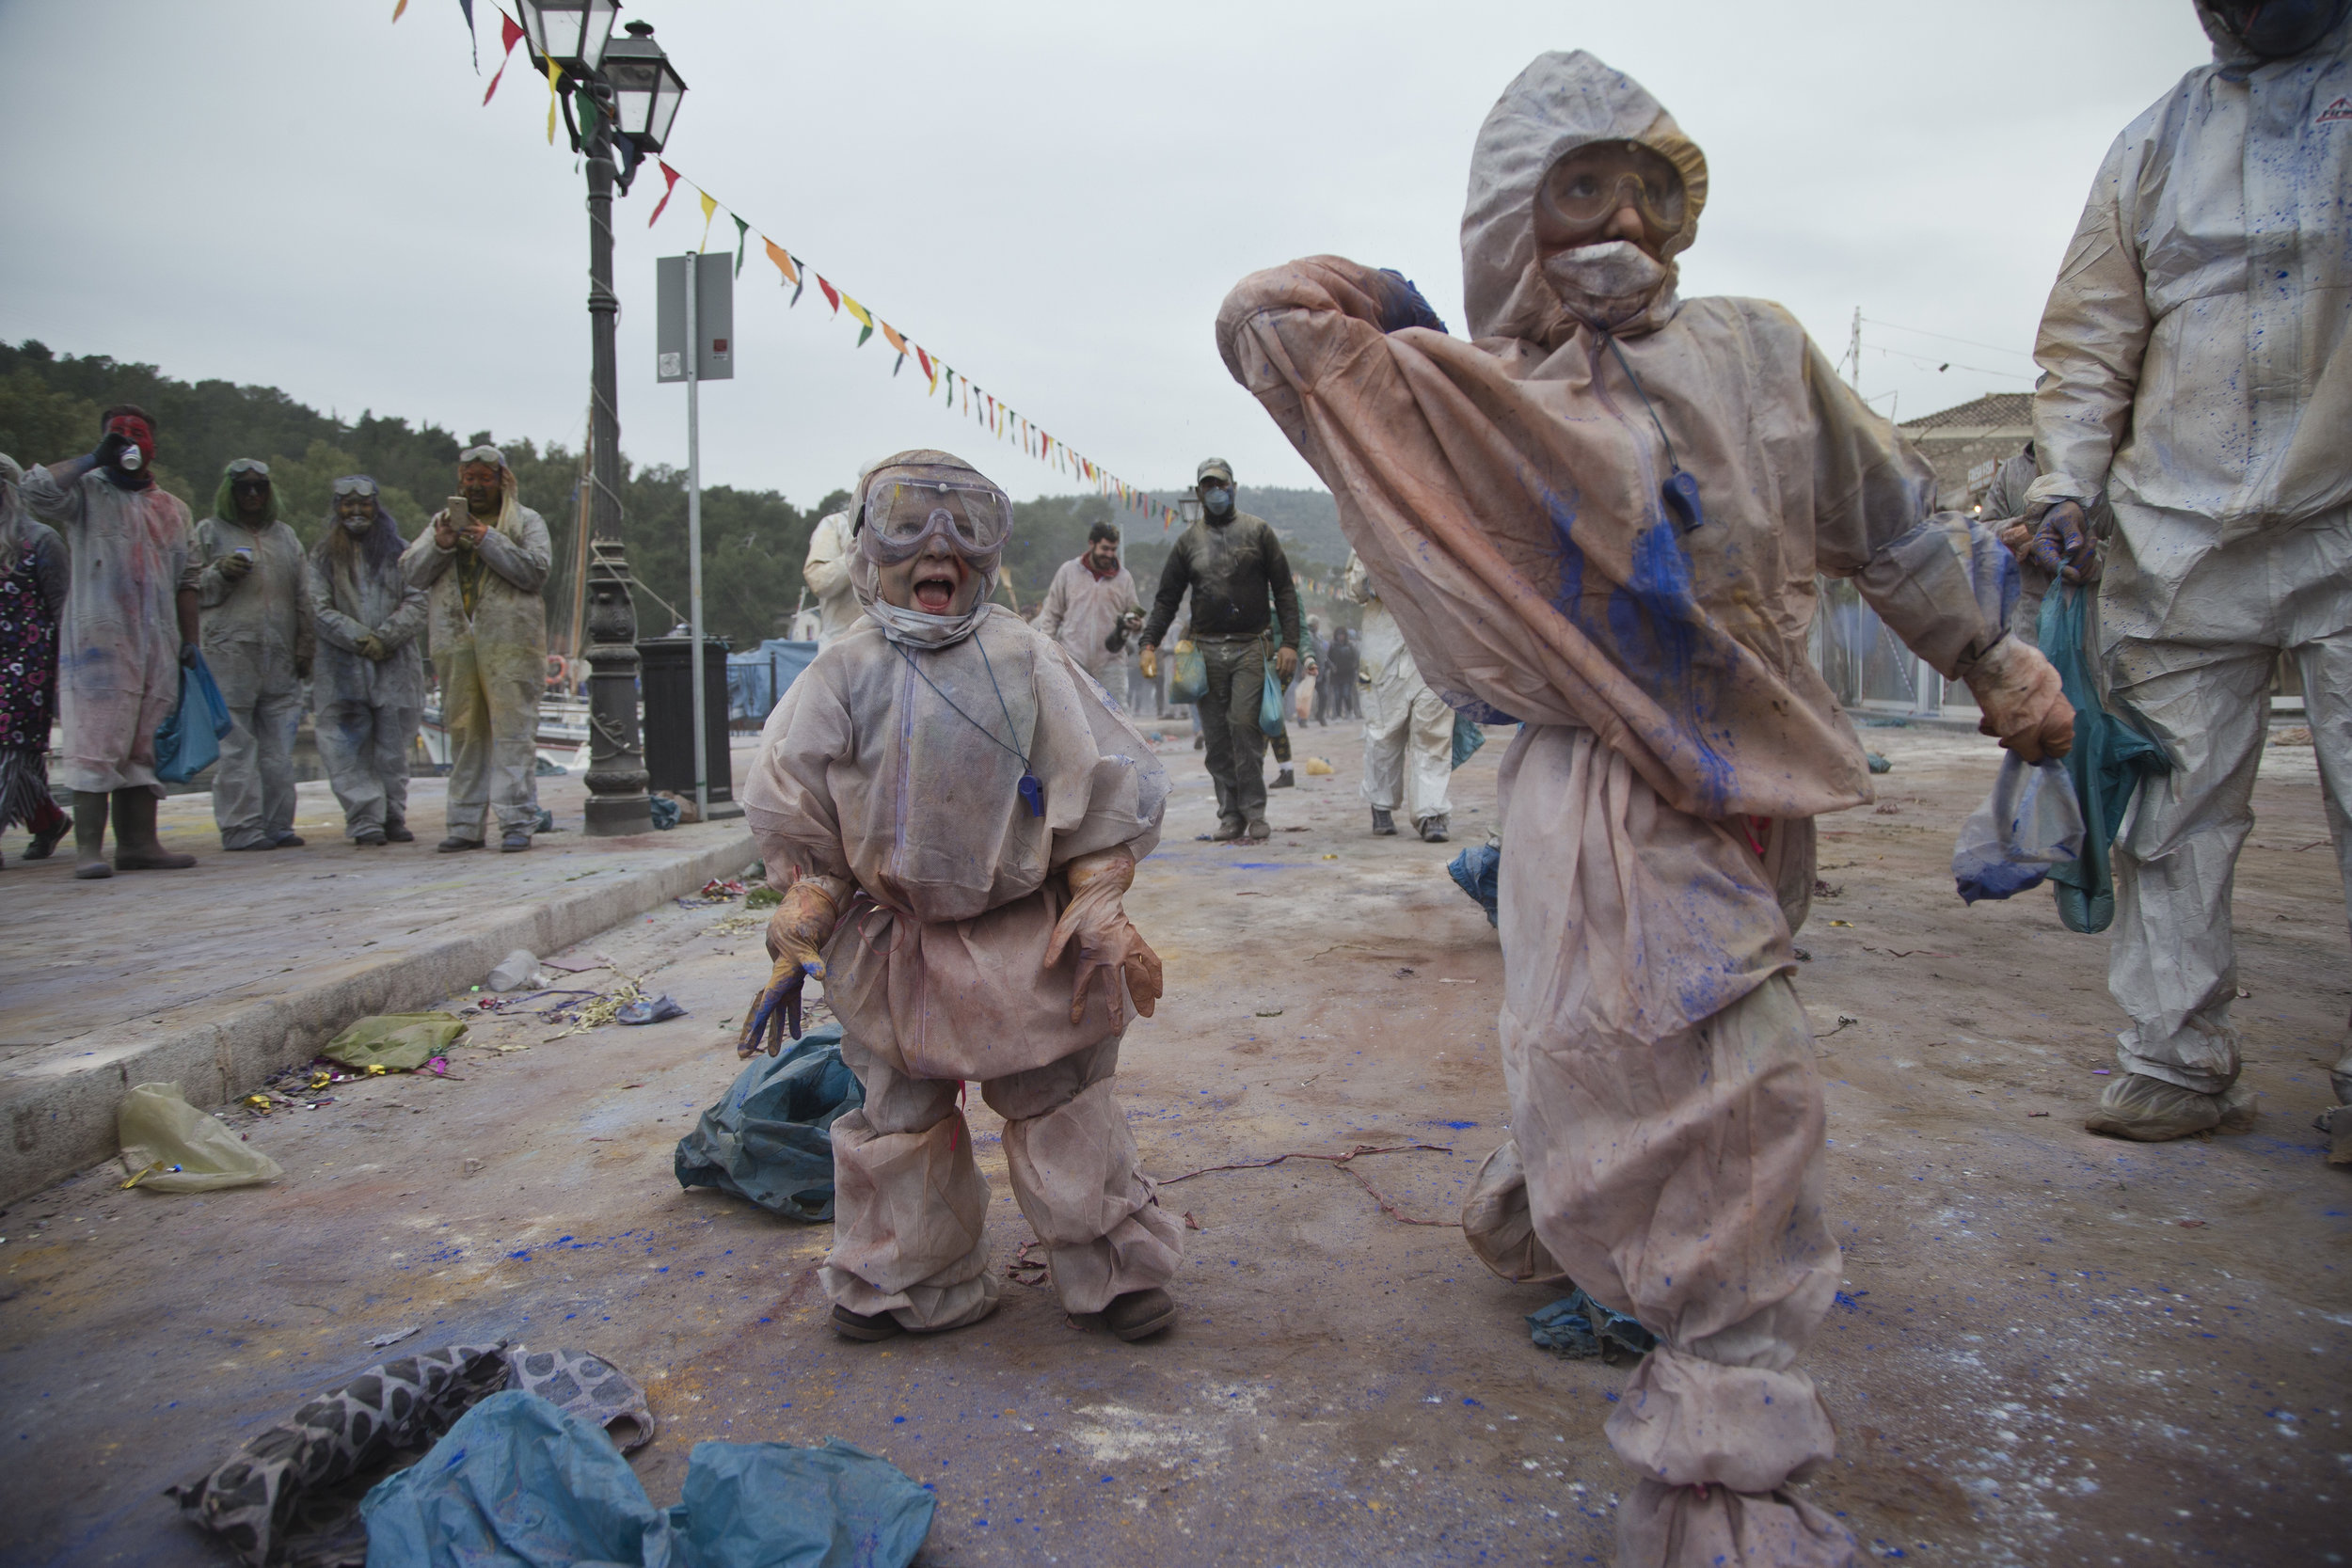  In this Monday, Feb. 19, 2018 photo, children throw flour as they take part in the flour war, a unique colorful flour fight marking the end of the carnival season in the port town of Galaxidi, some 200 kilometers (120 miles) west of Athens.  (AP Pho